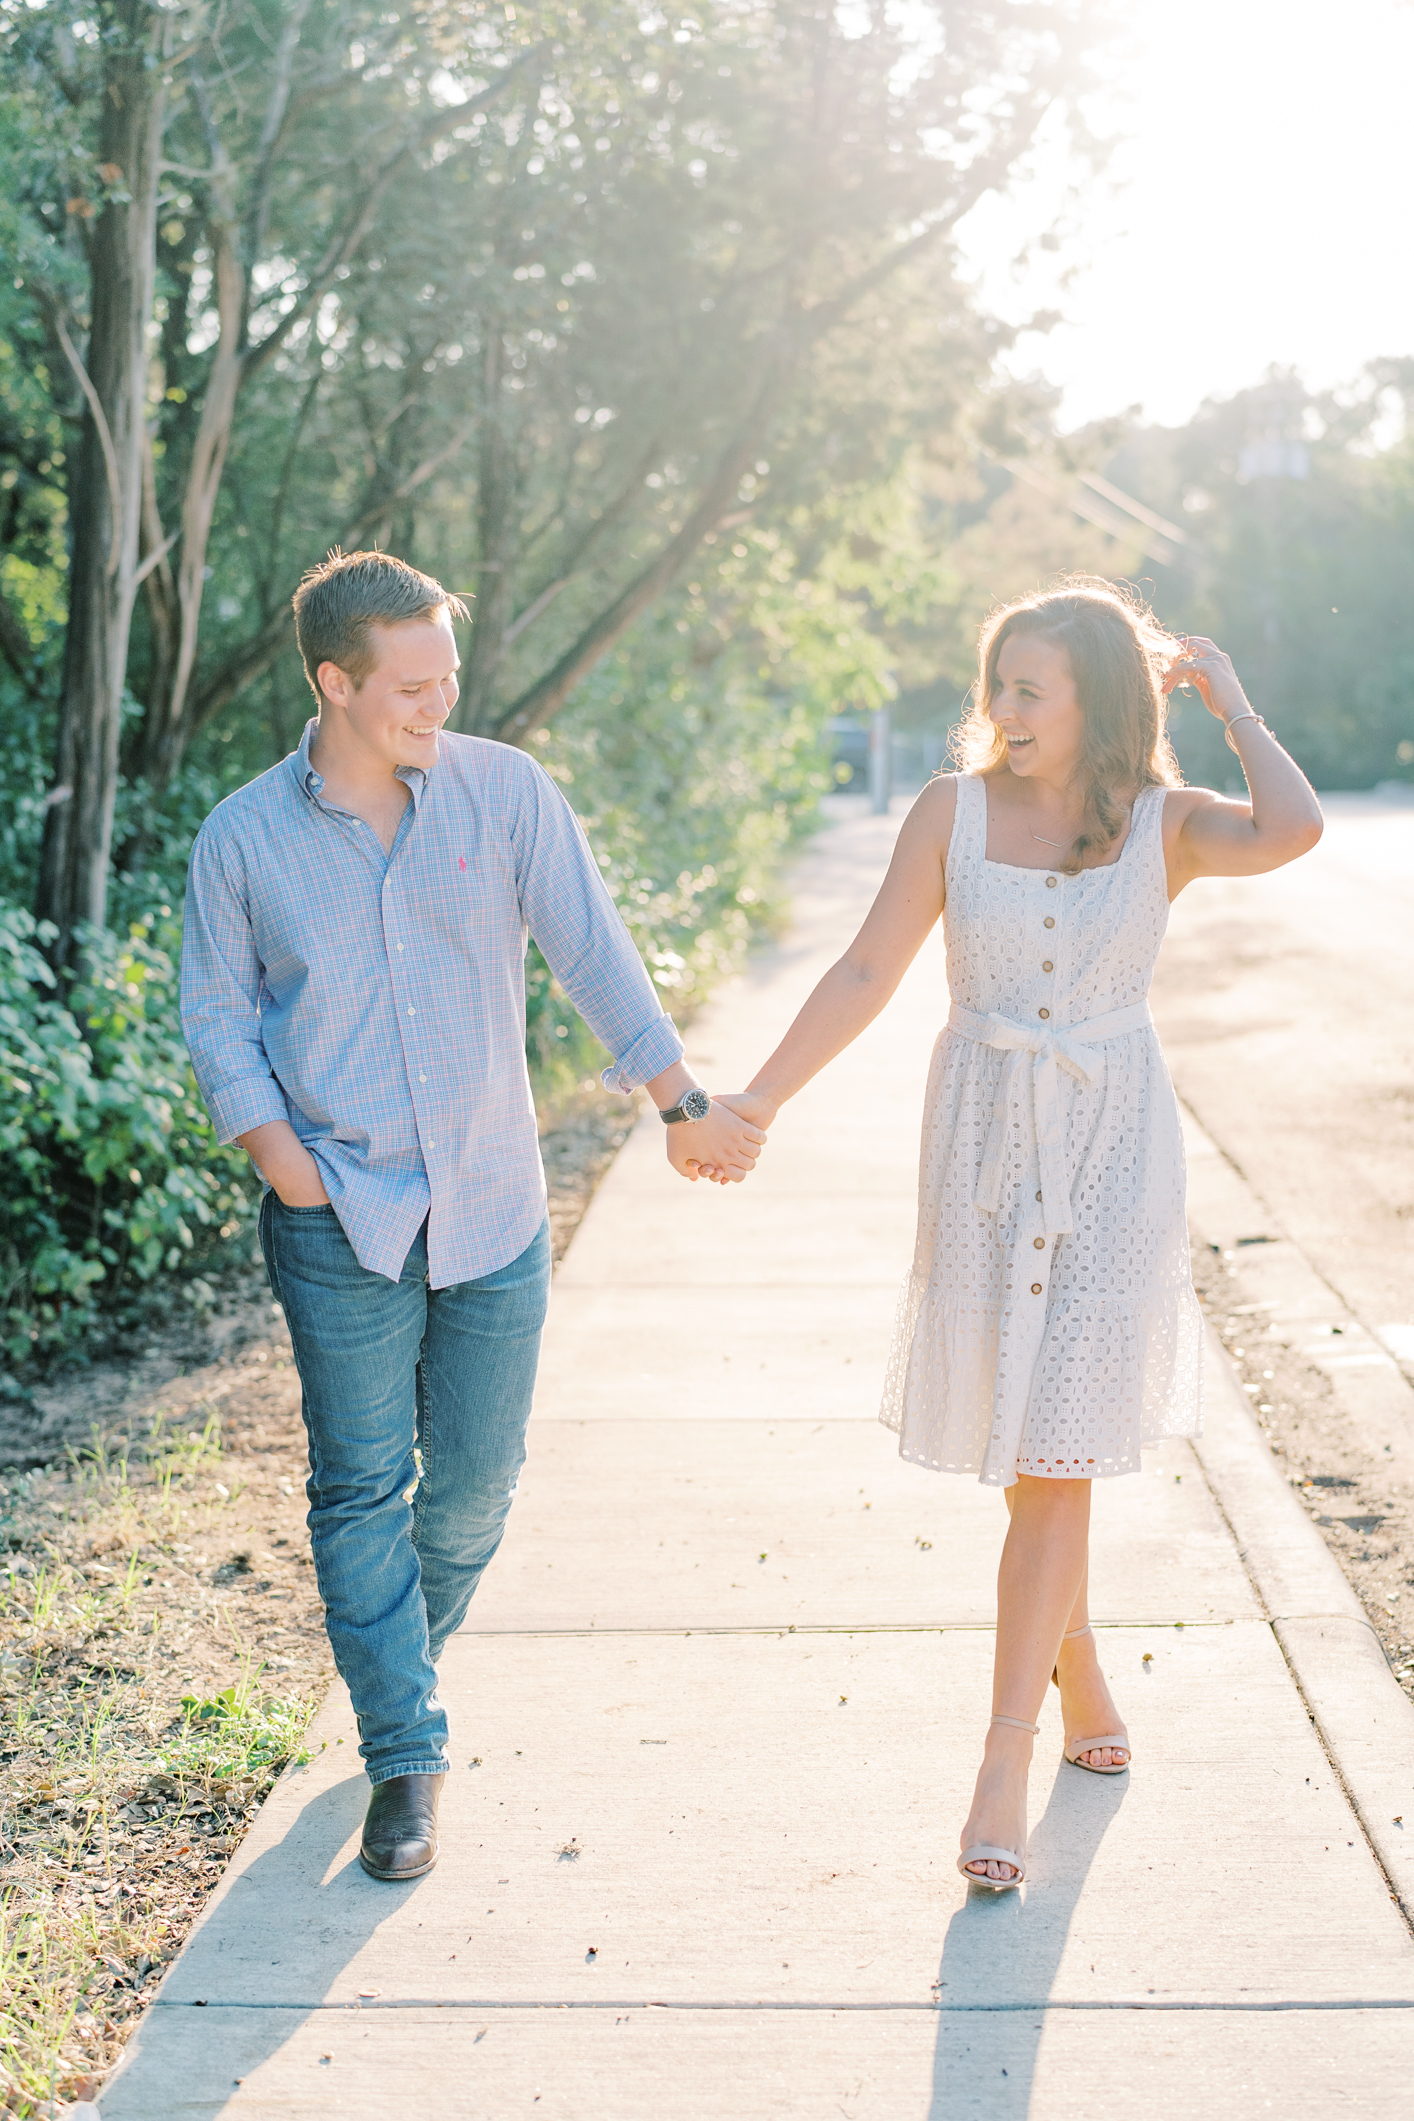 Popping champagne and watching the sunset over the lake? The best way to end a Laguna Gloria engagement session in my eyes!! This is my favorite Austin, TX engagement session location ever! Click through to see how adorable Emily and Trevor are...and see some serious outfit inspo! #engagementsessionoutfitinspo #atxengagementsession #lagunagloria